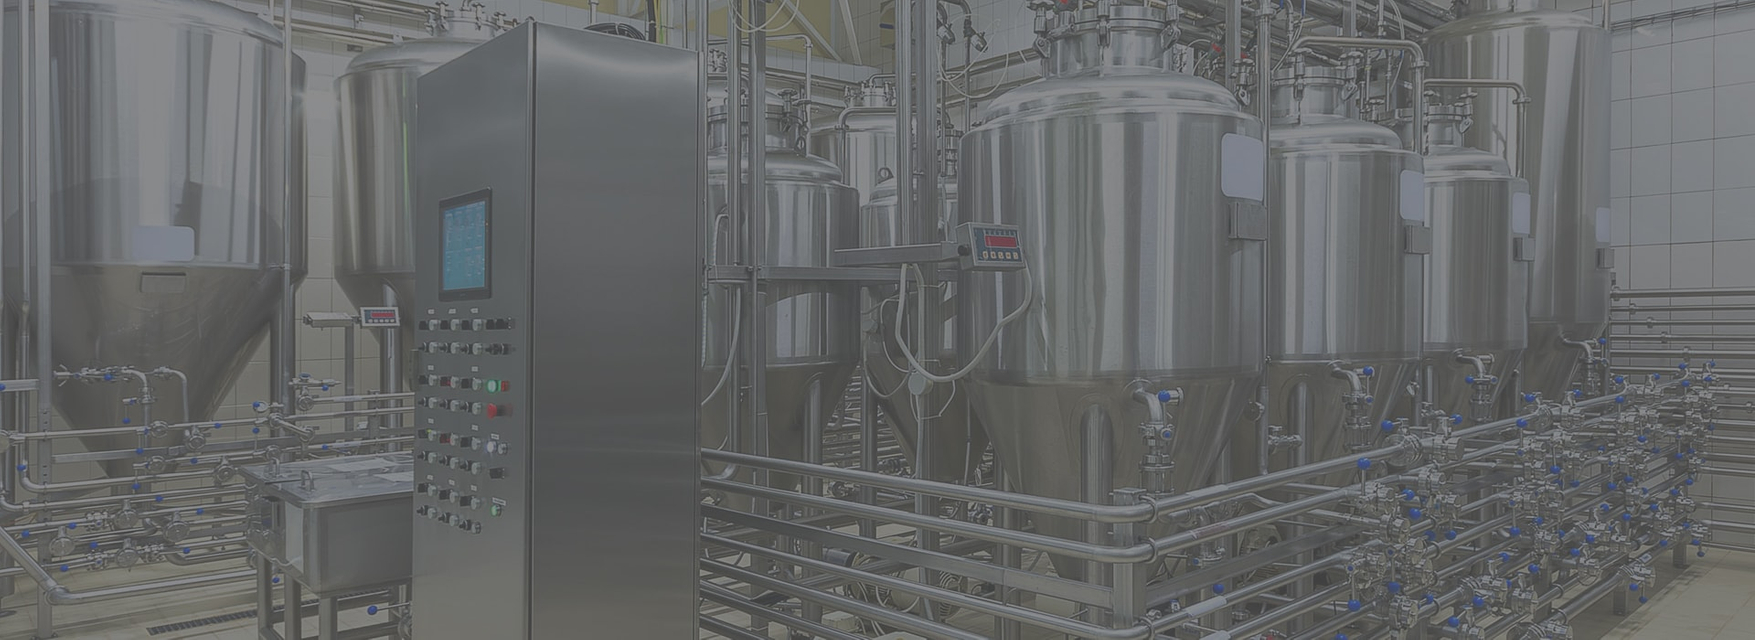 Brewhouse-system